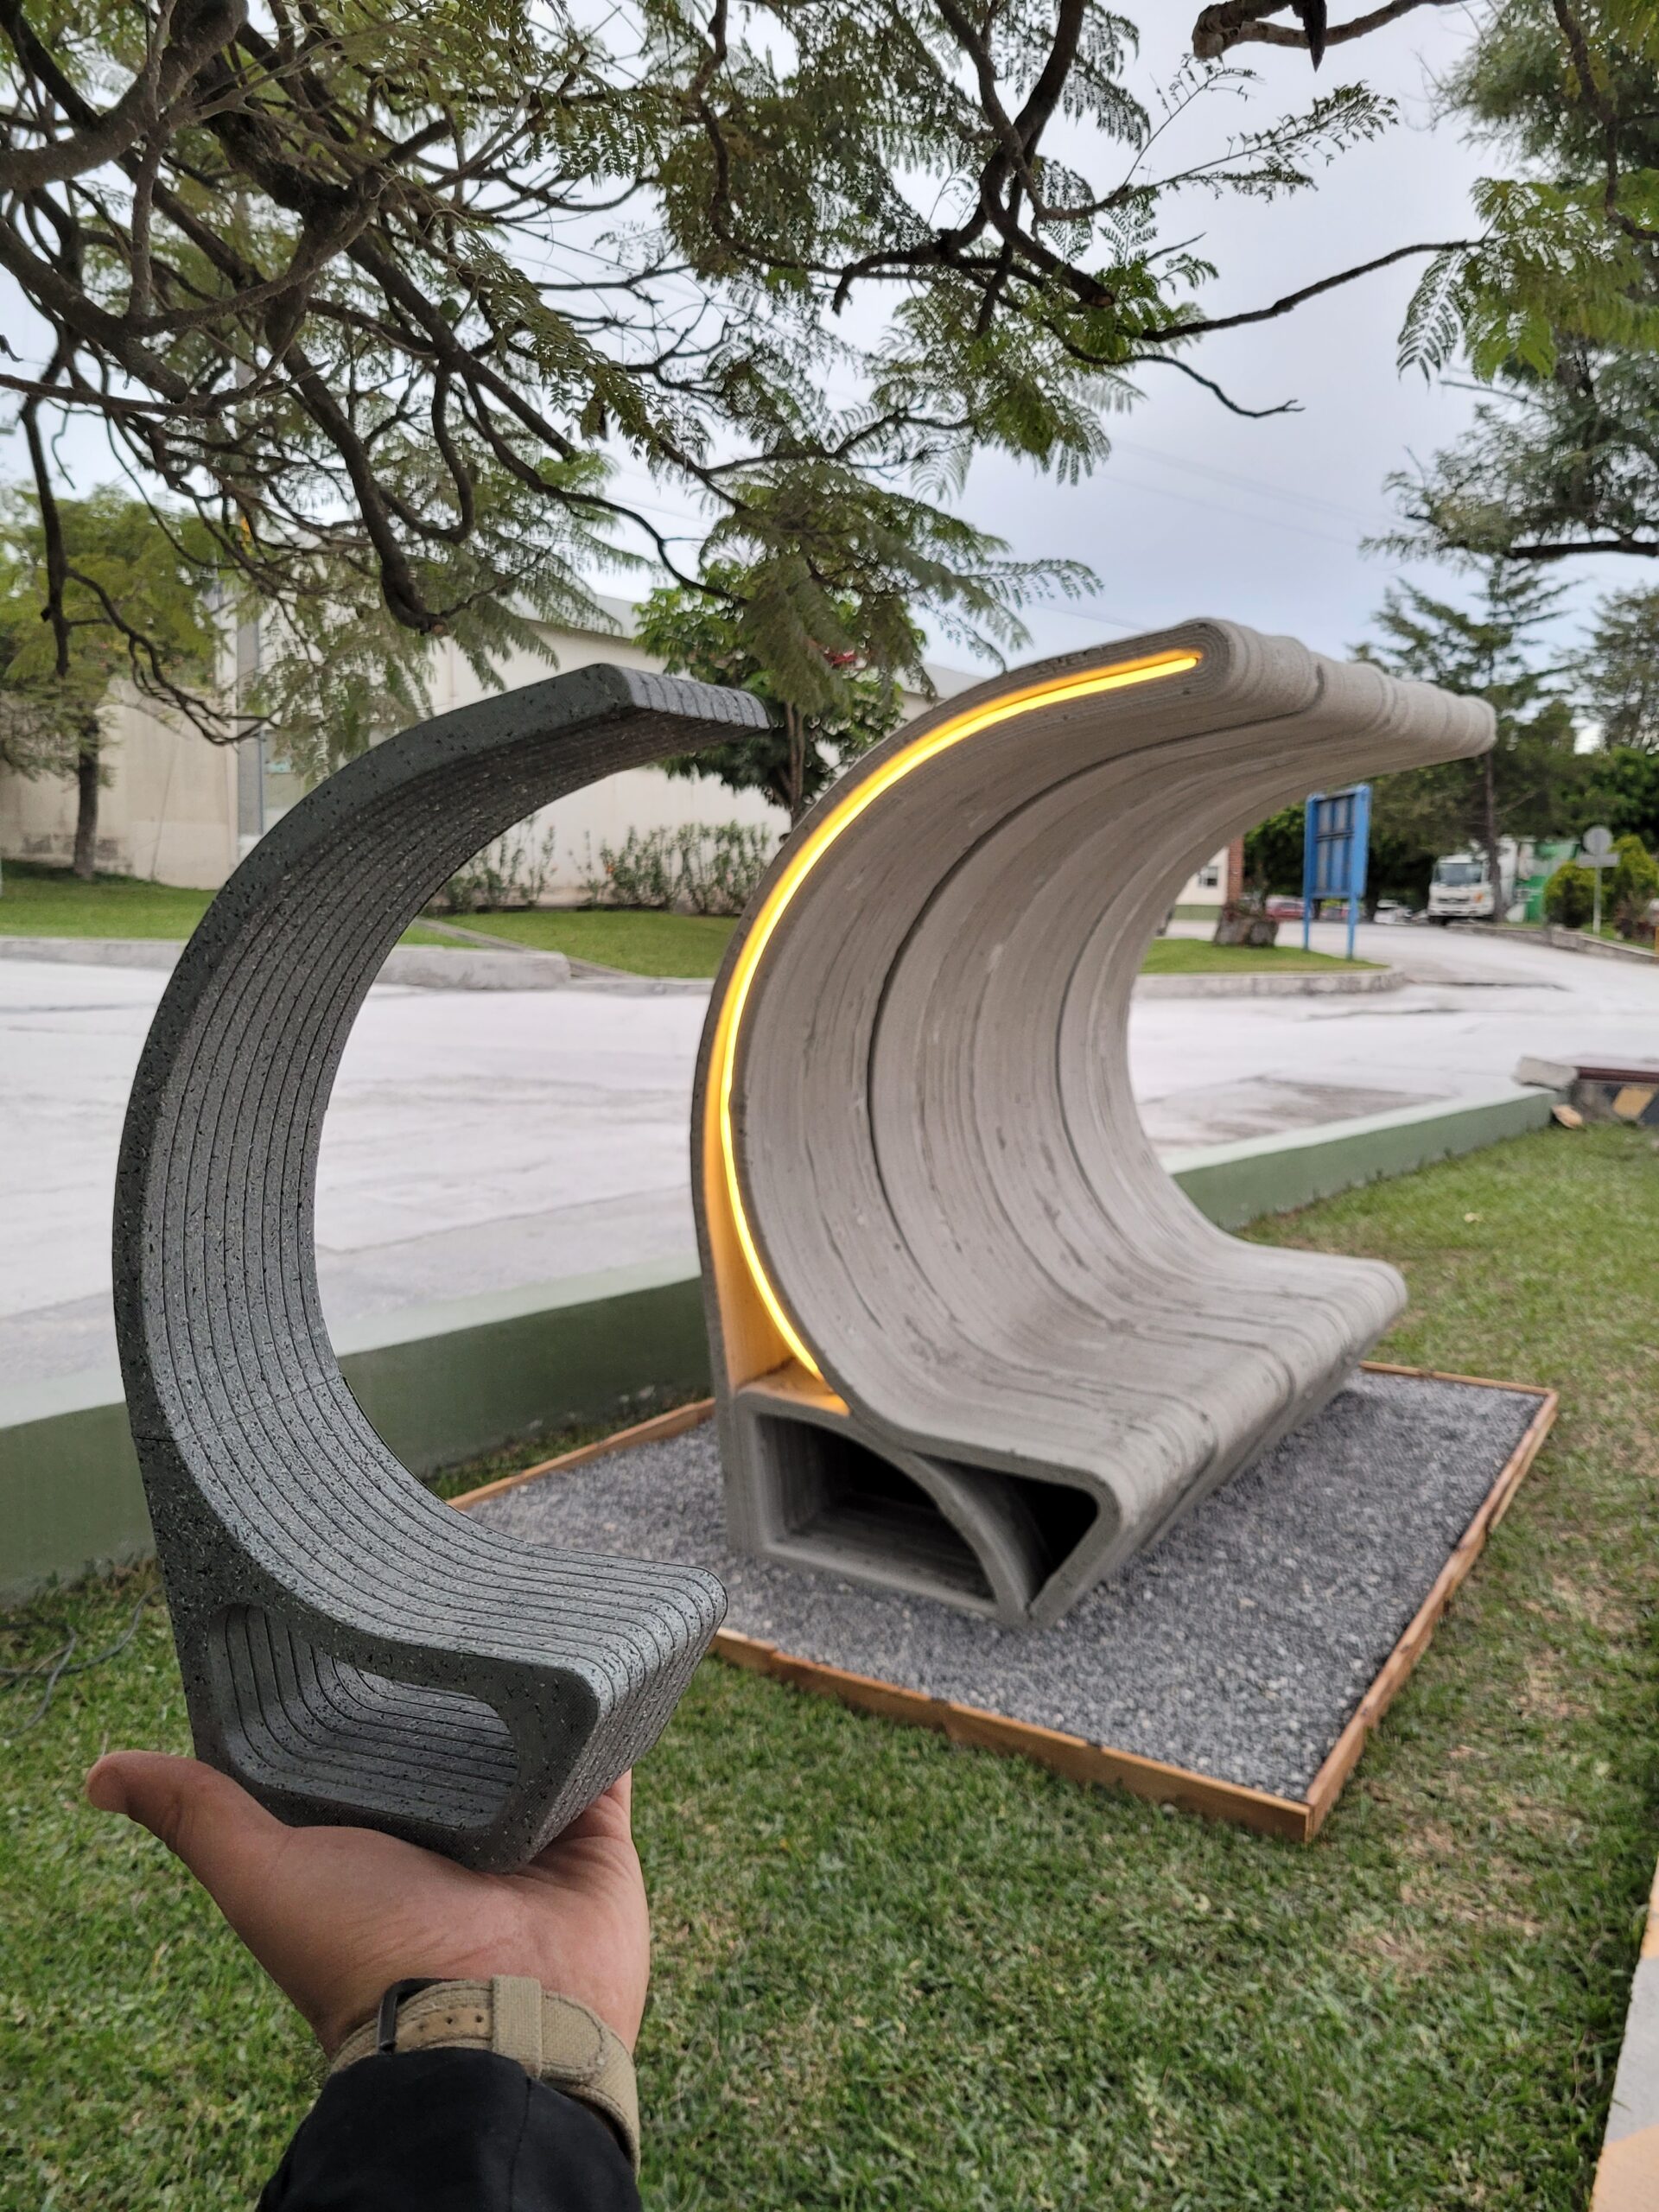 Cementos Progreso 3D printed projects using COBOD printer